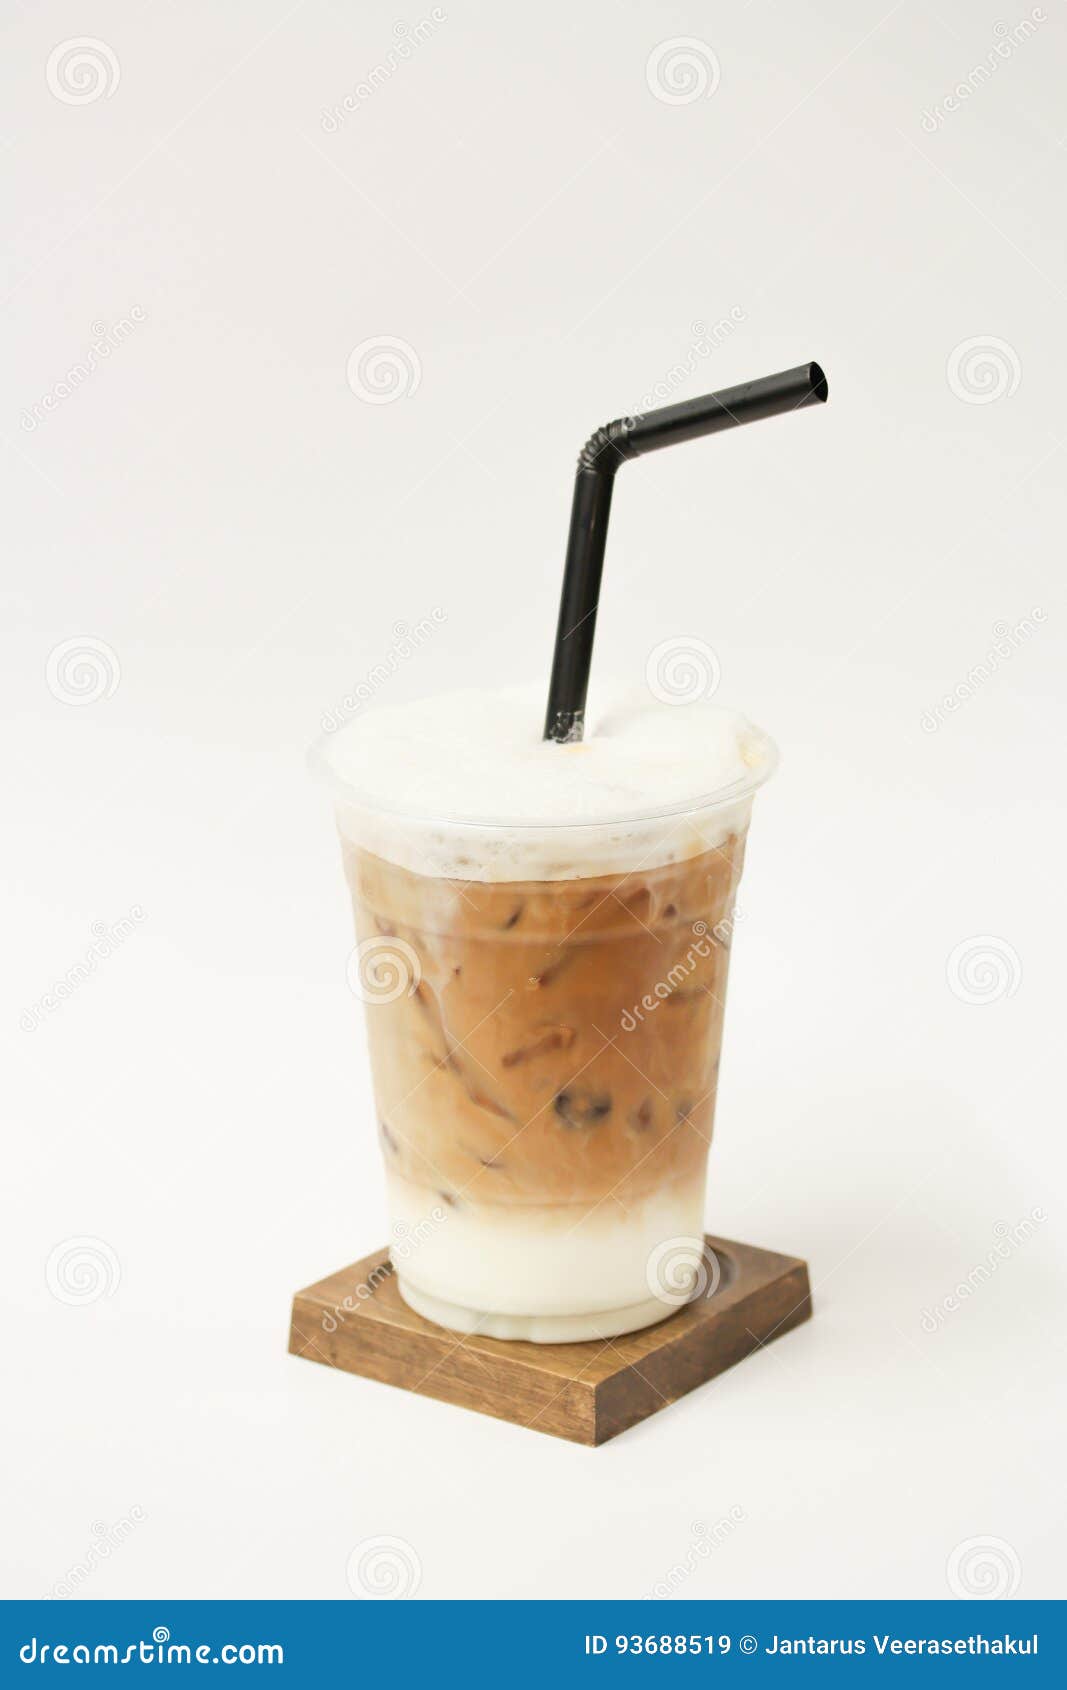 https://thumbs.dreamstime.com/z/iced-latte-takeaway-cup-white-background-93688519.jpg